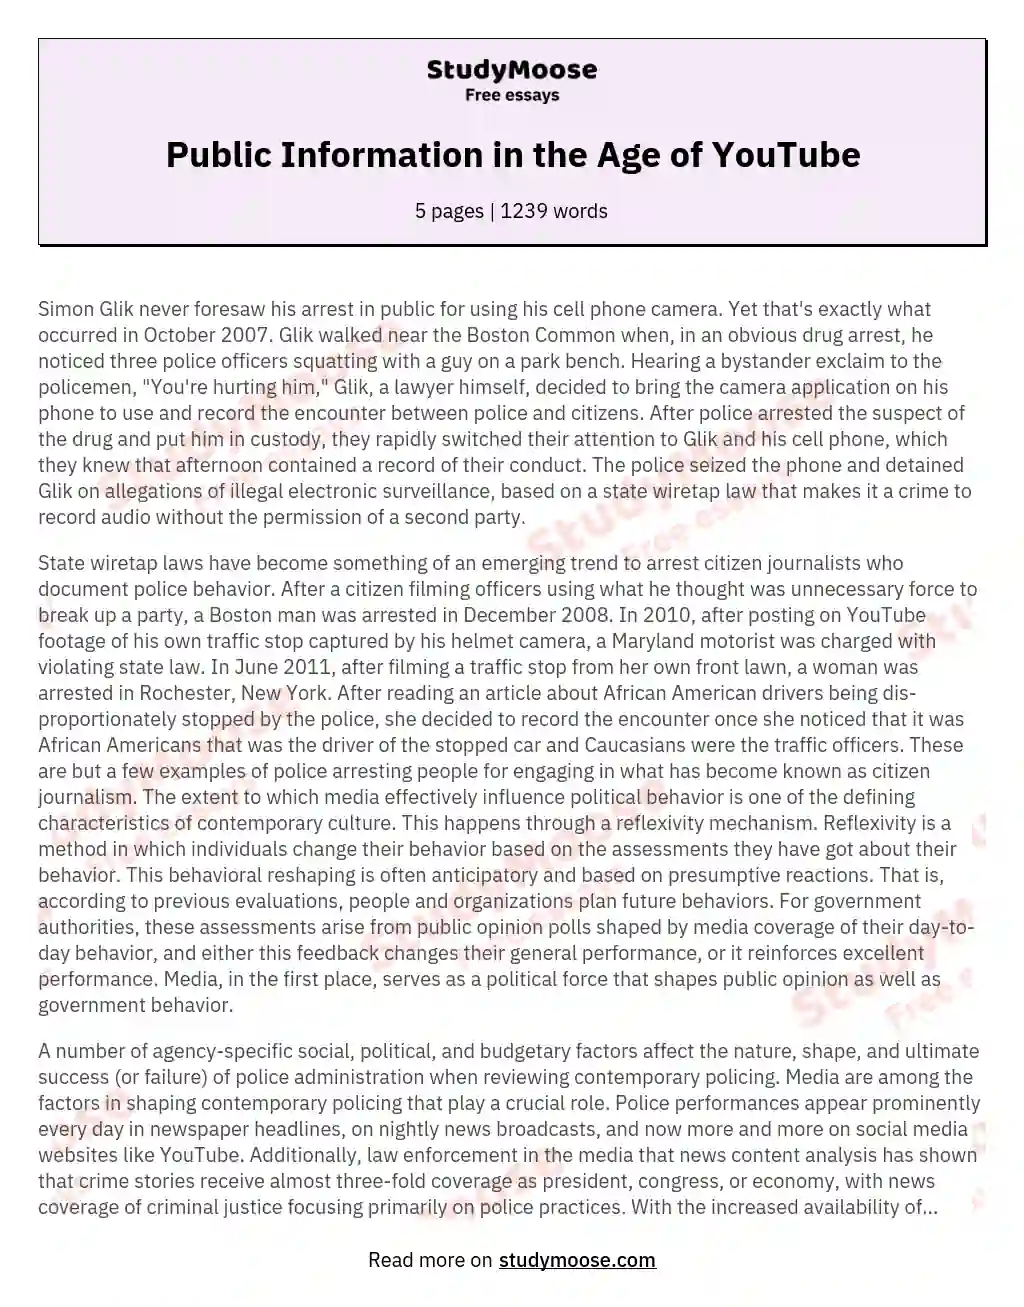 Public Information in the Age of YouTube essay